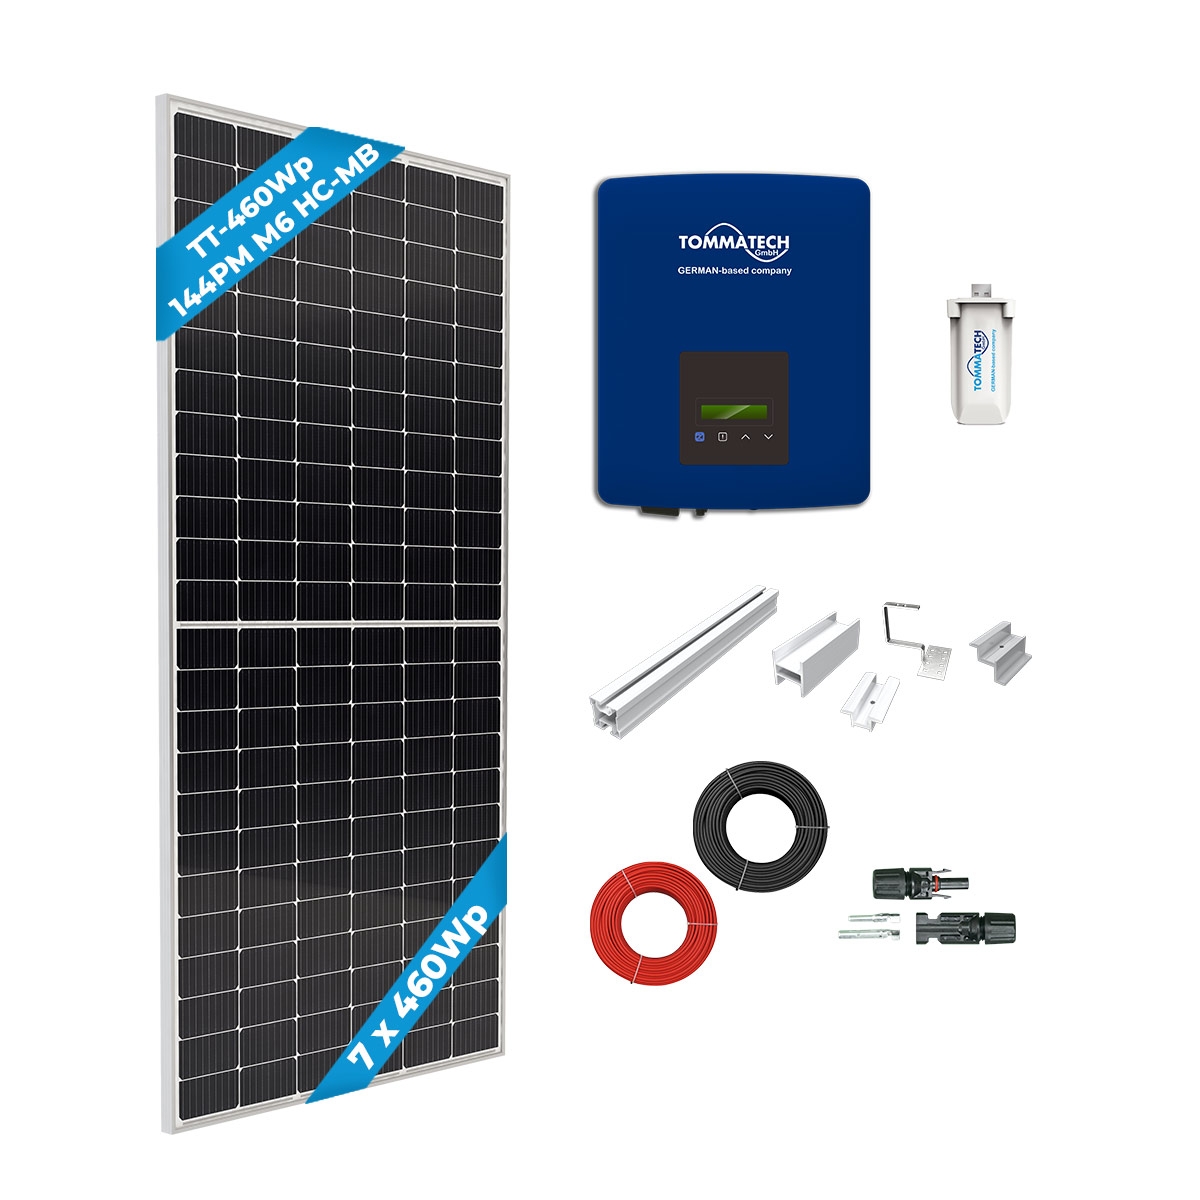 TommaTech 3kWe Tile Roof Single Phase On-Grid Solar Package